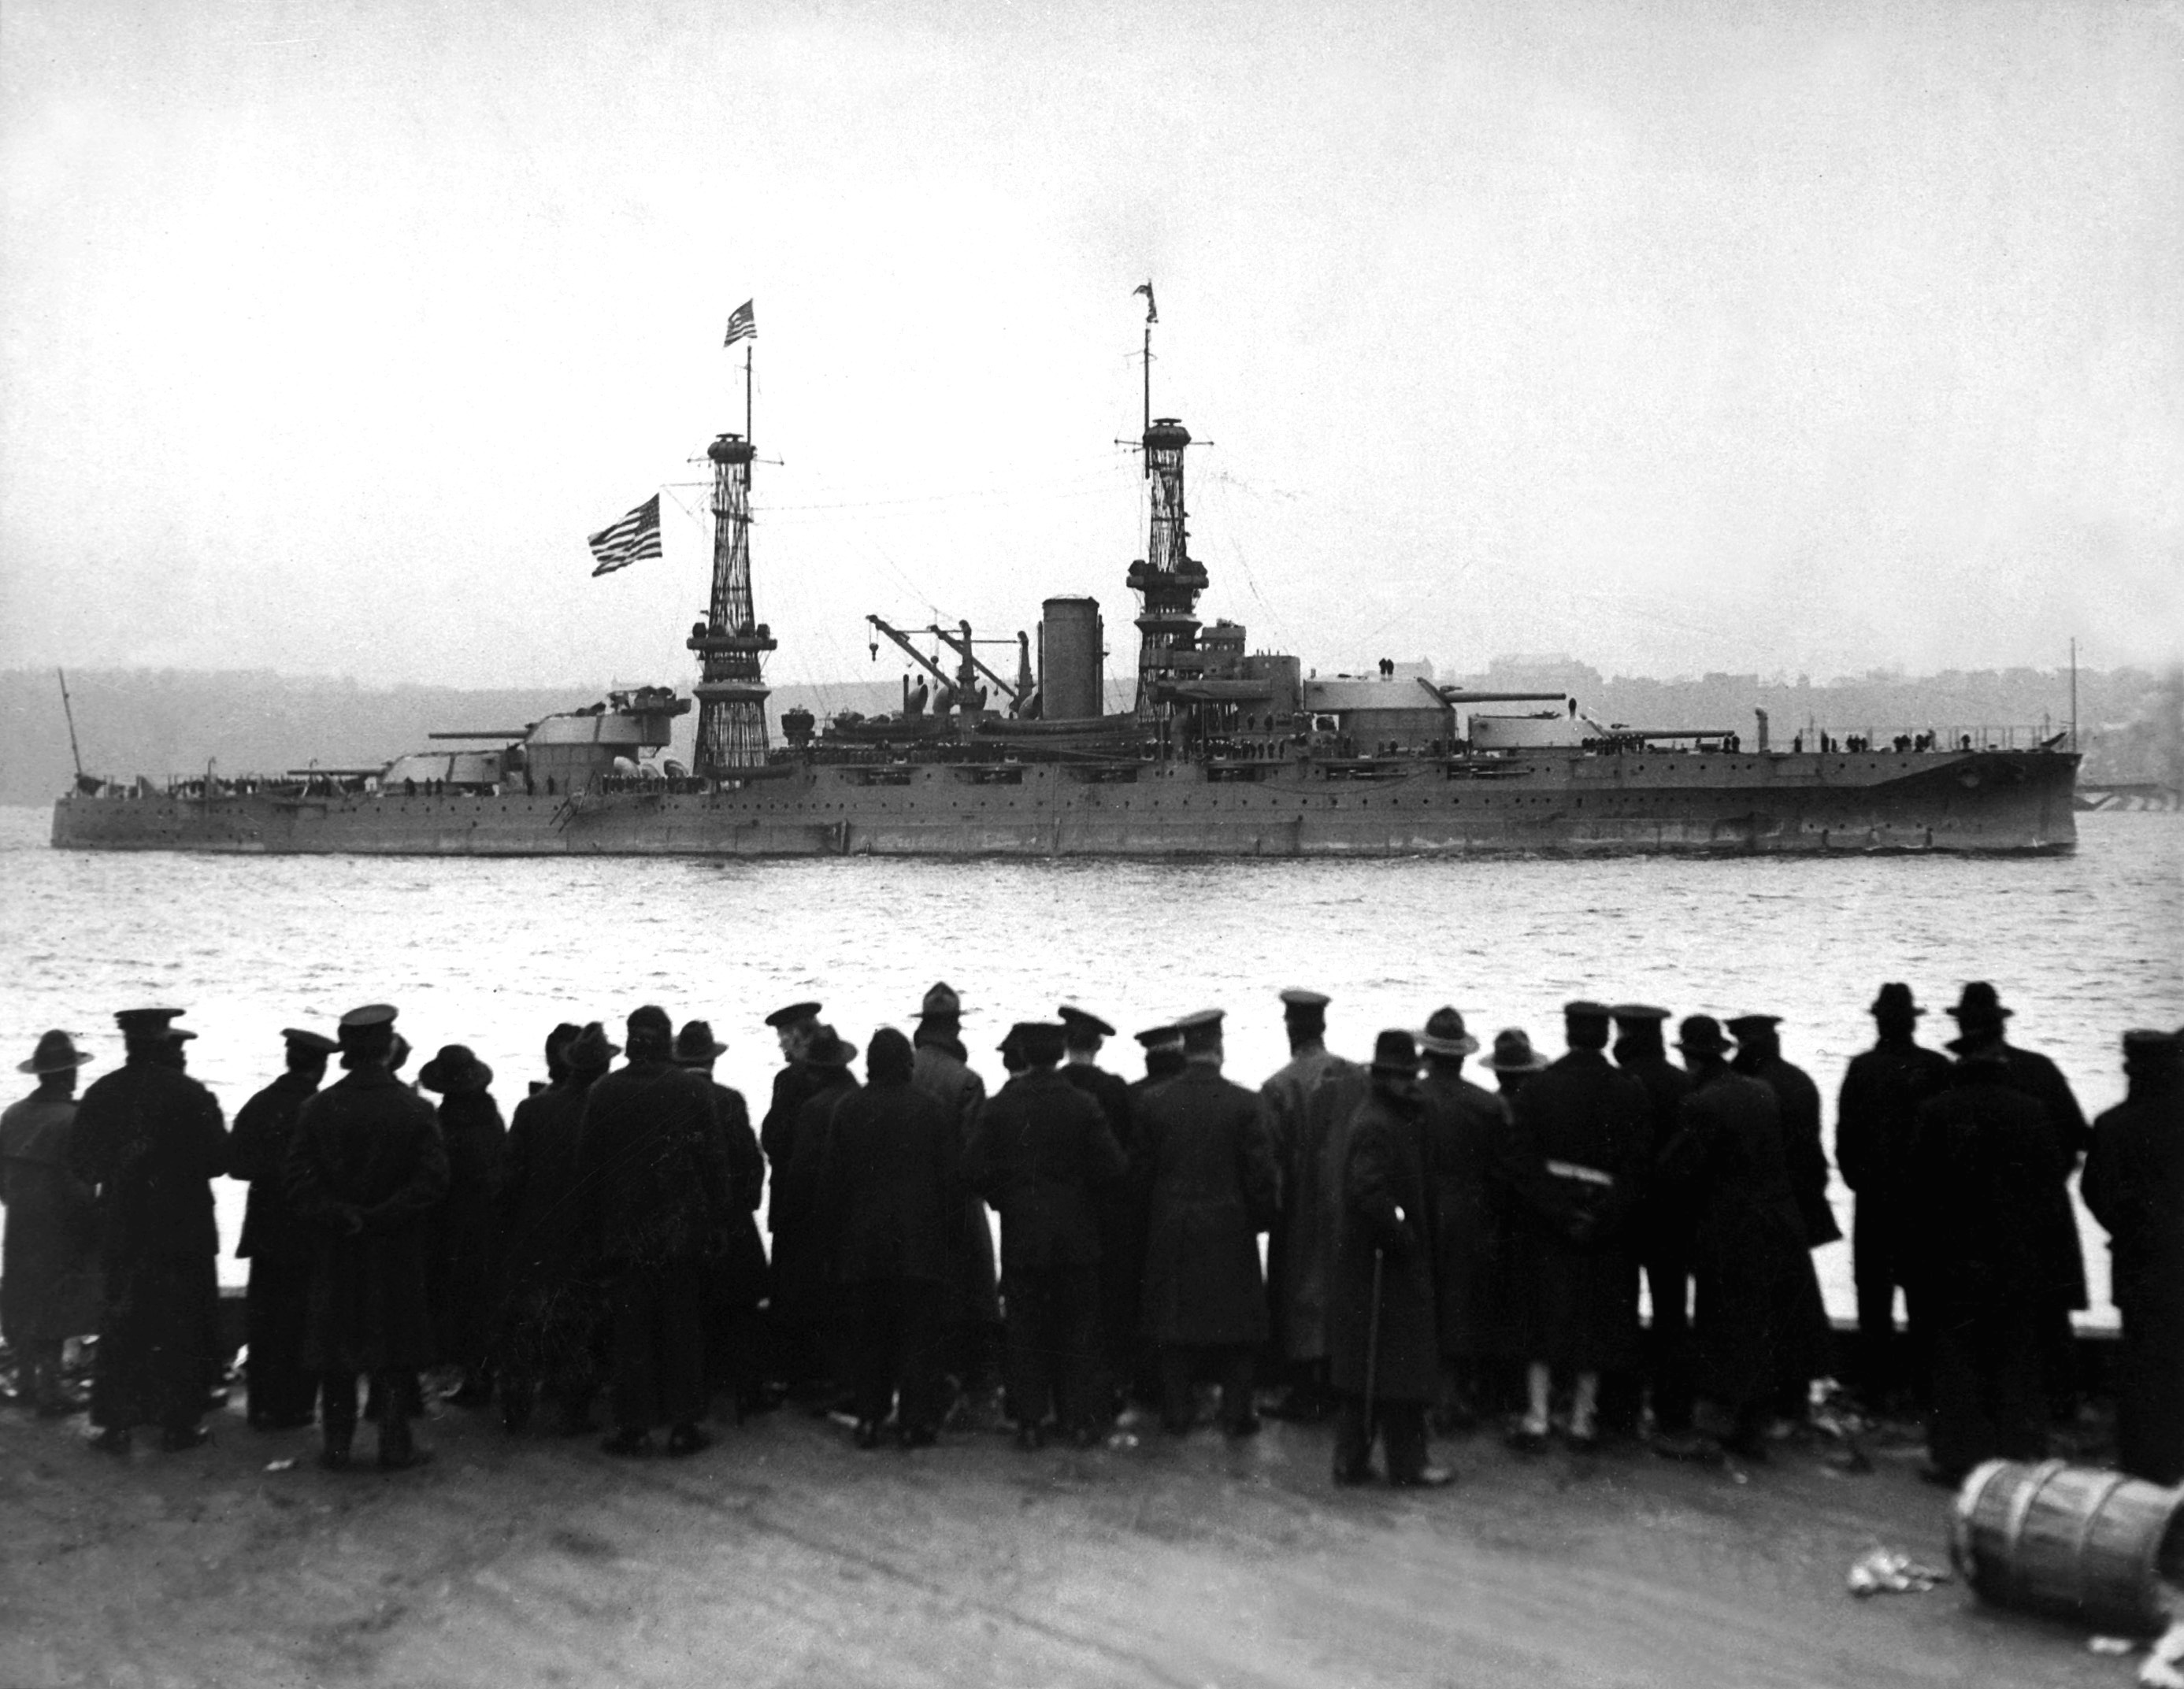 USS Arizona passing 96th Street Pier during a naval review in New York City, New York, United States, 26 Dec 1918